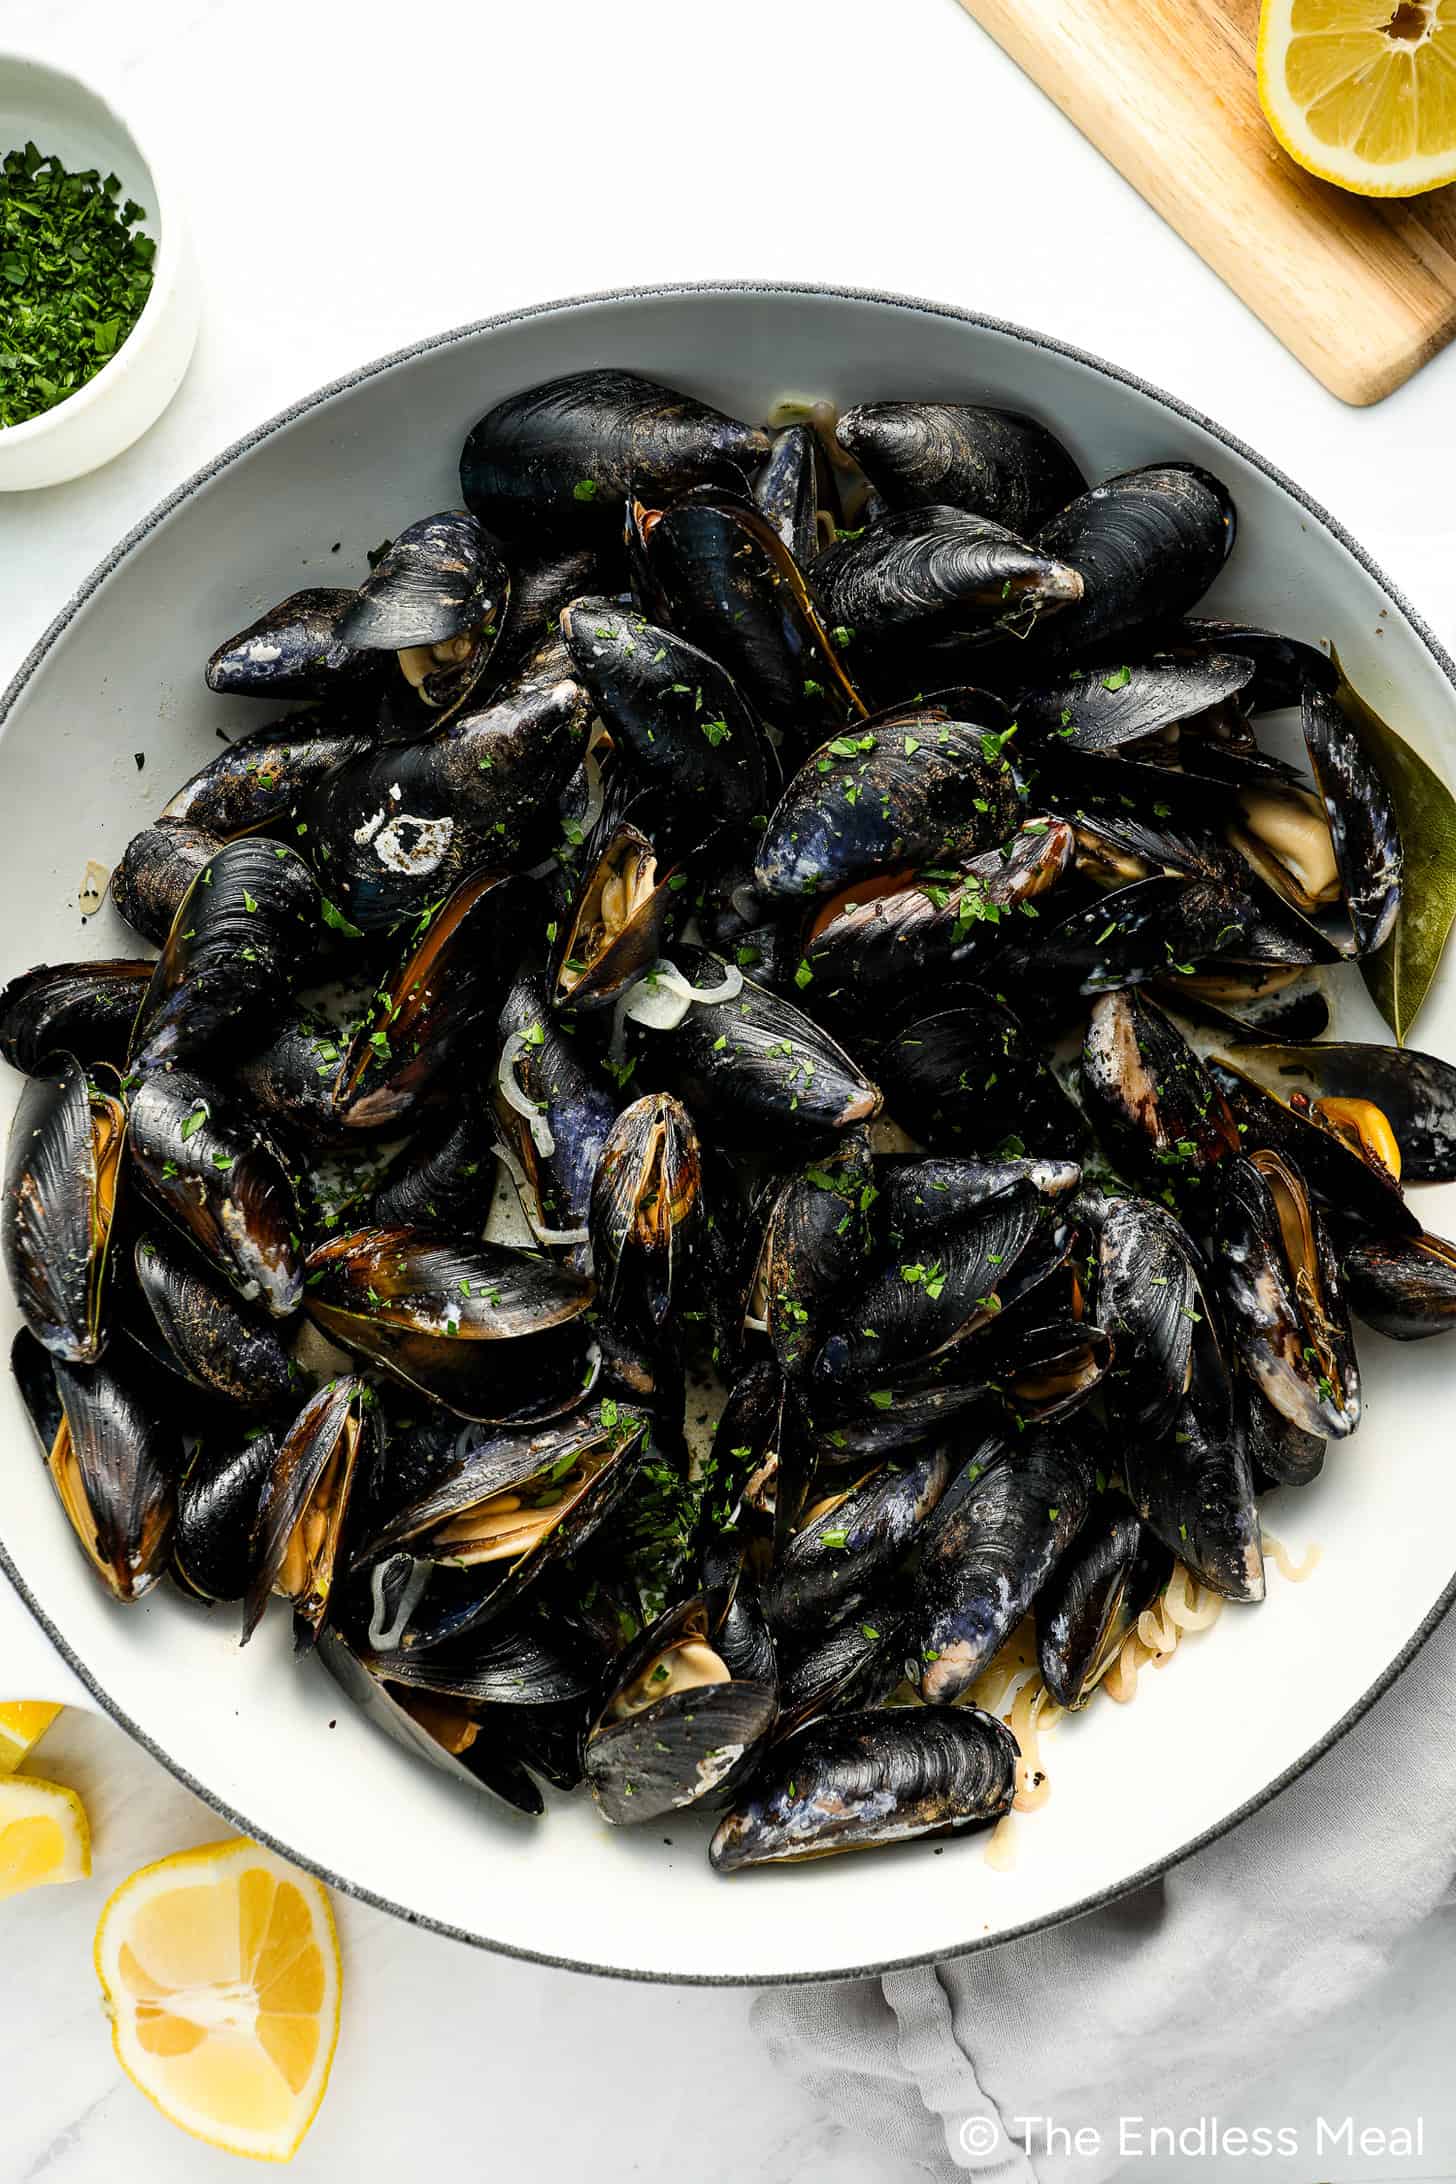 This mussels recipe in a serving bowl.